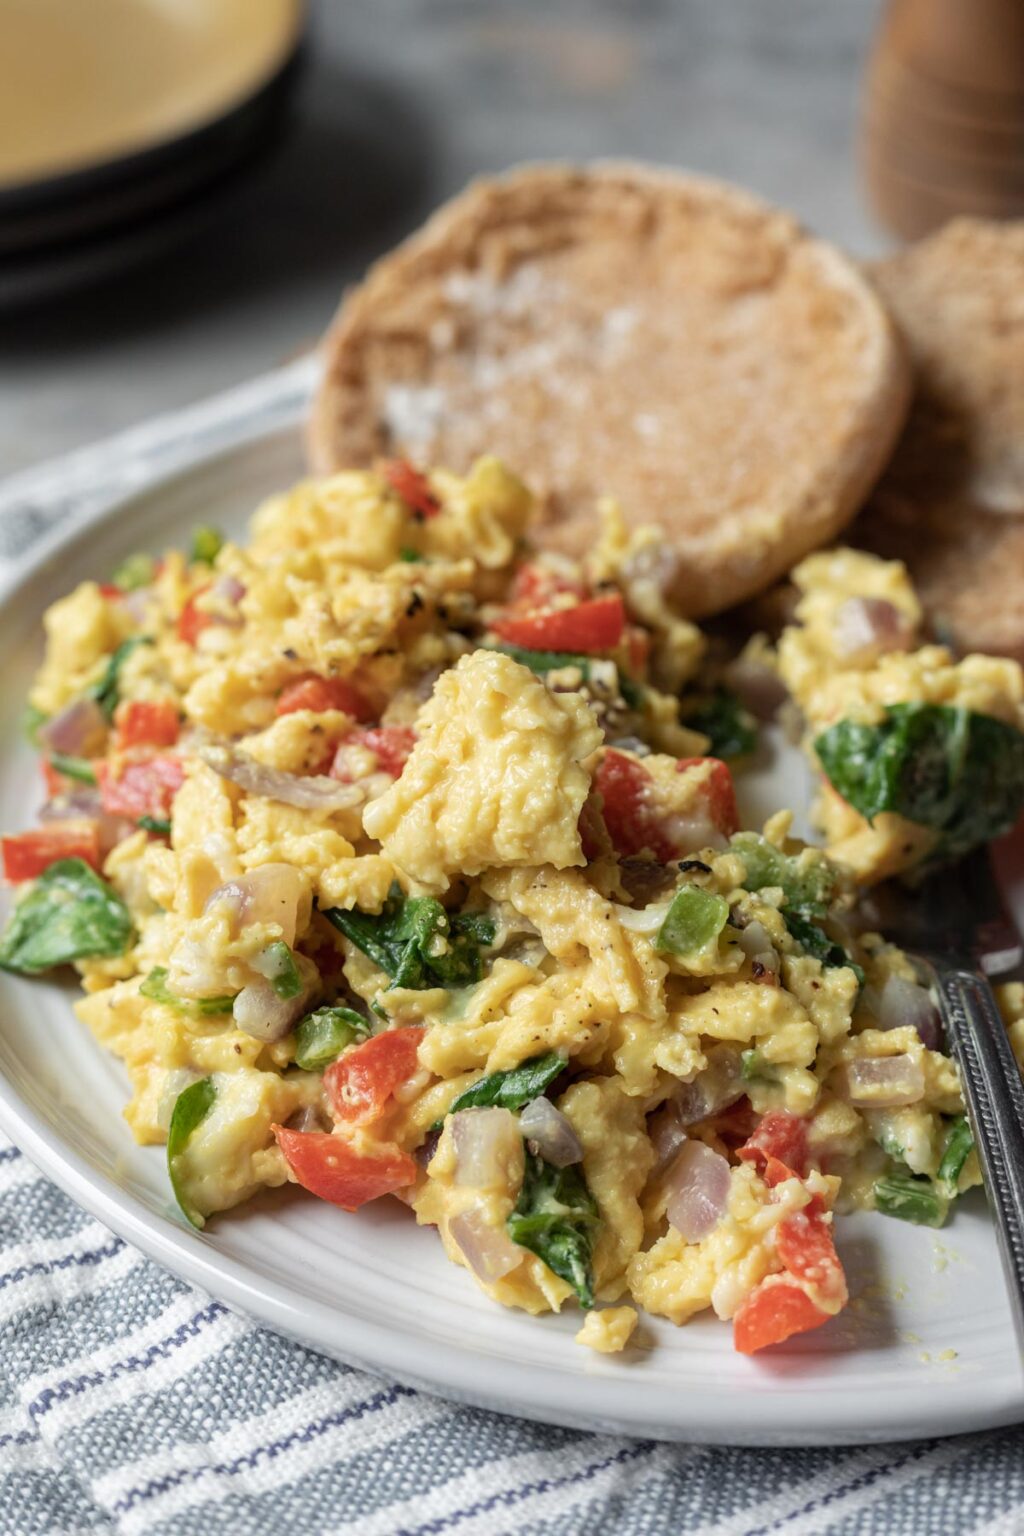 Ultimate JUST Egg Scramble - My Quiet Kitchen